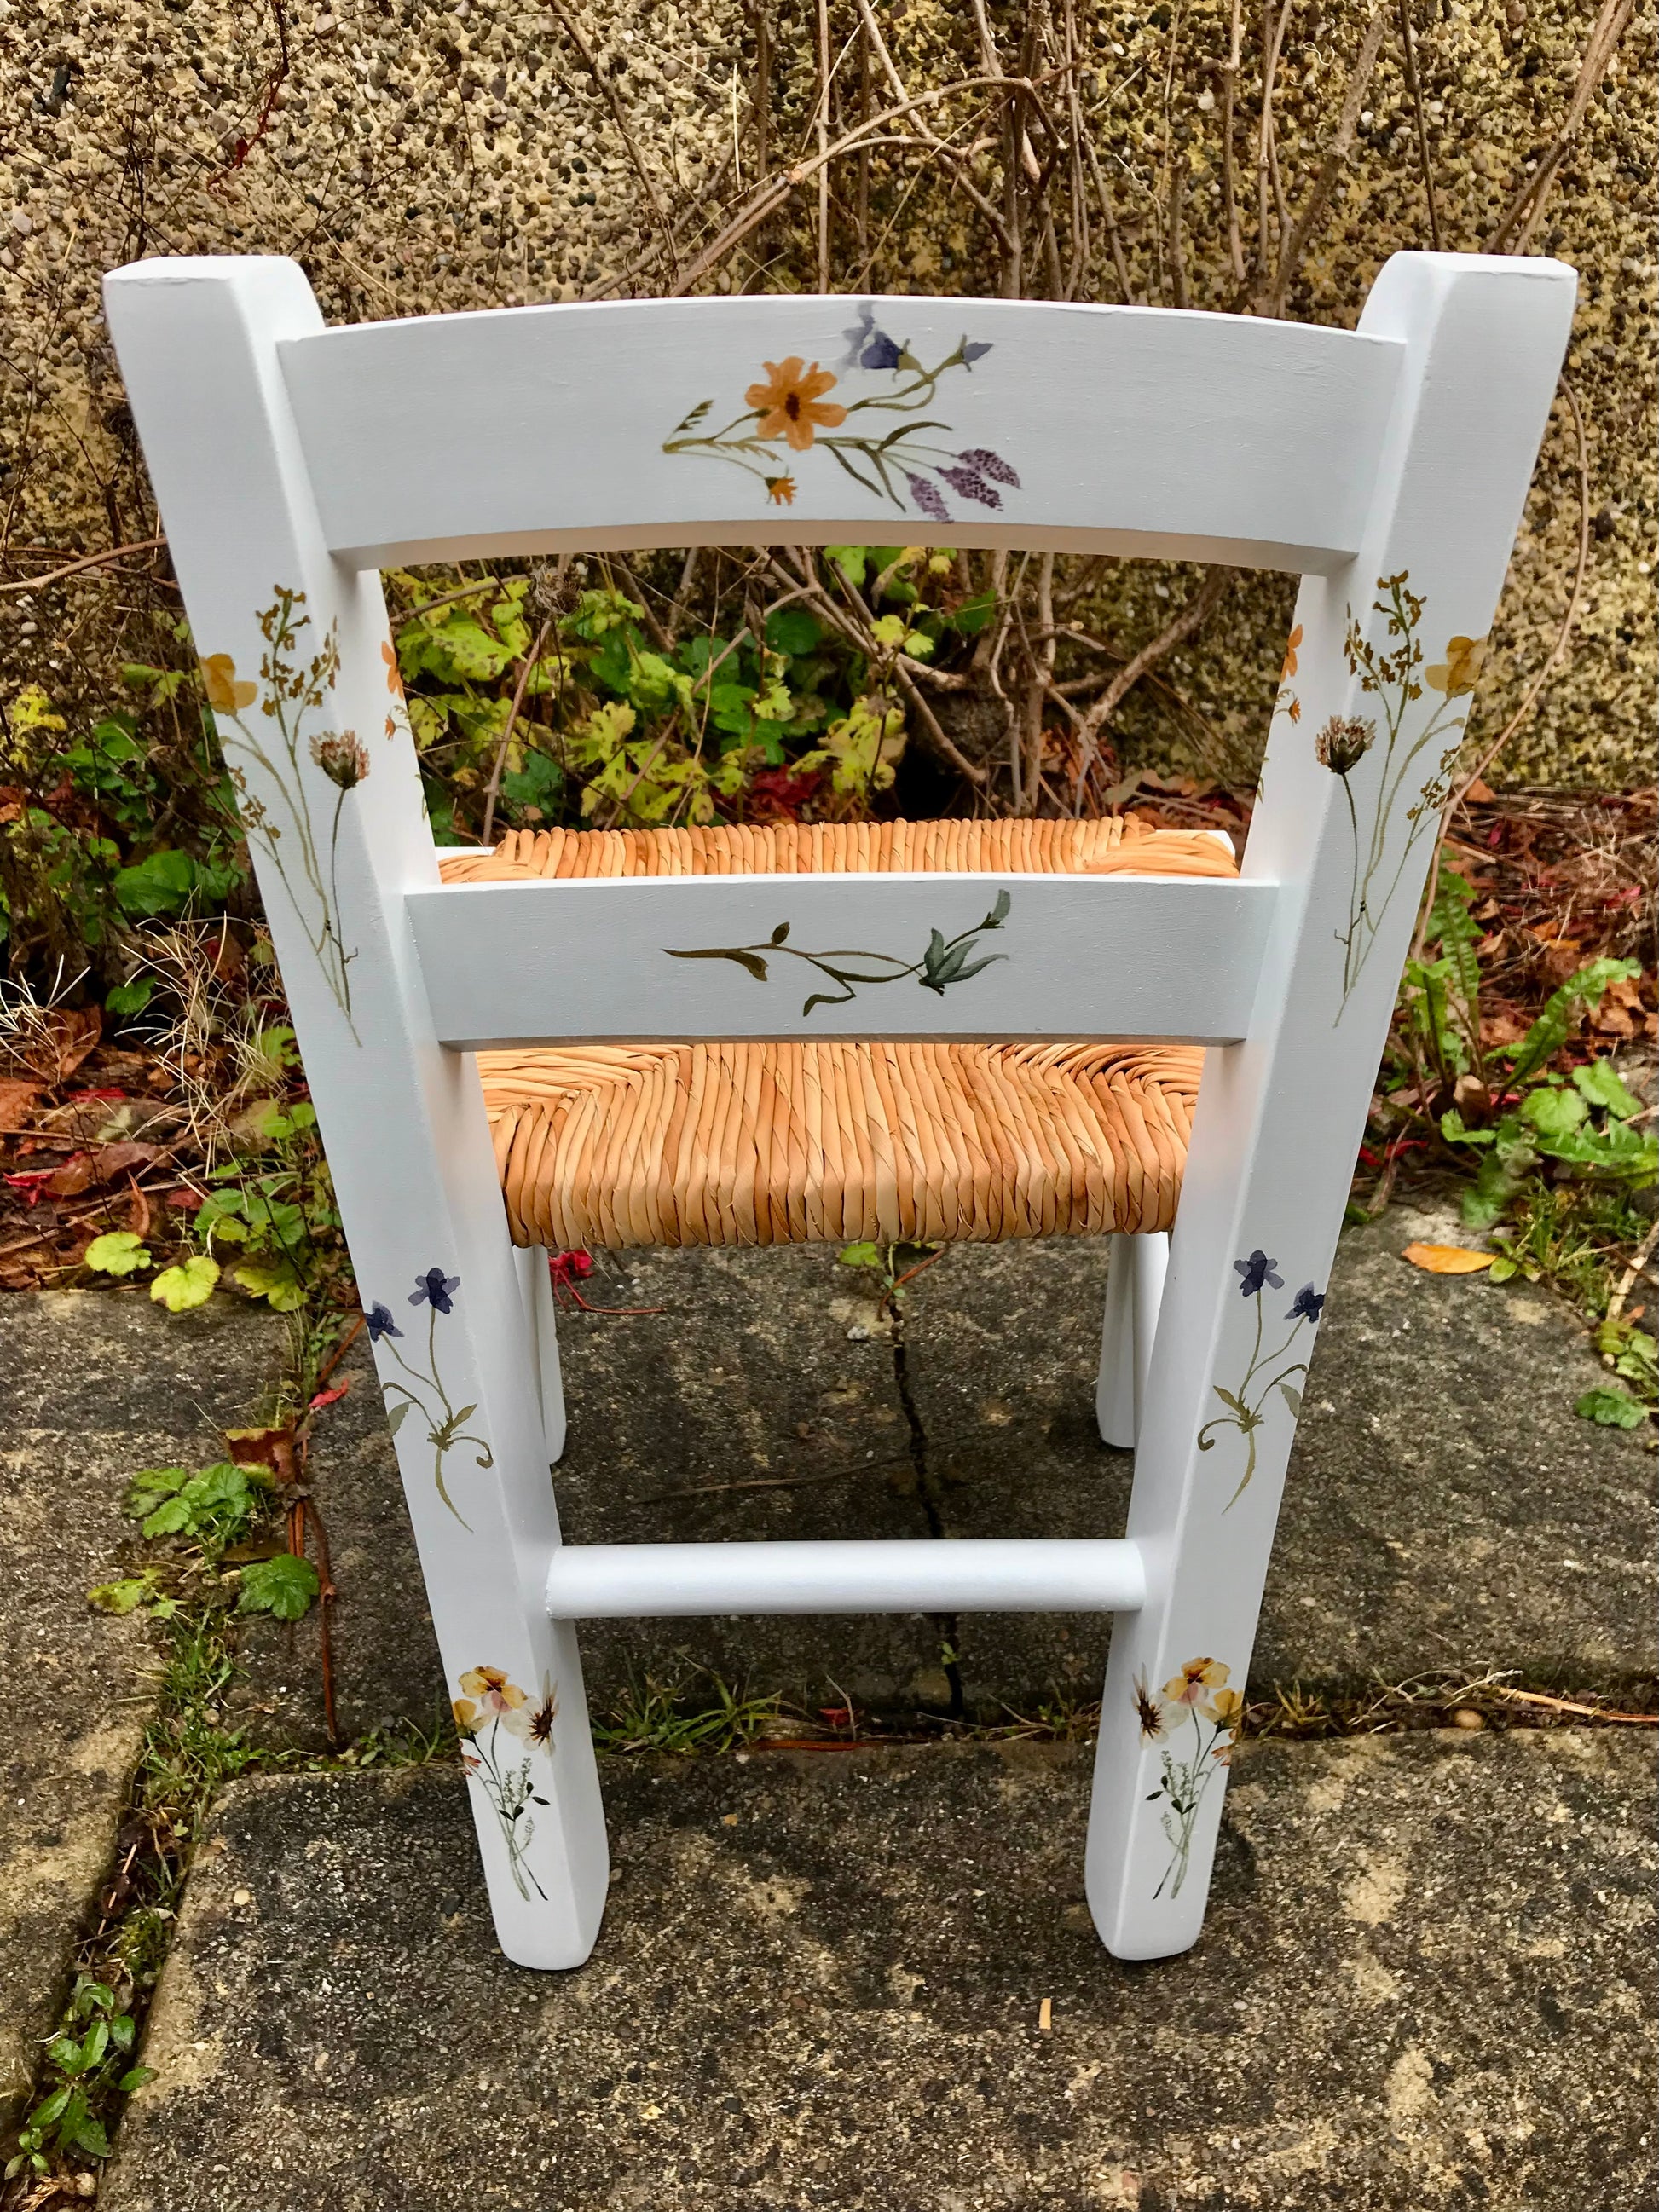 Rush seat personalised children's chair - Wildflowers theme - made to order